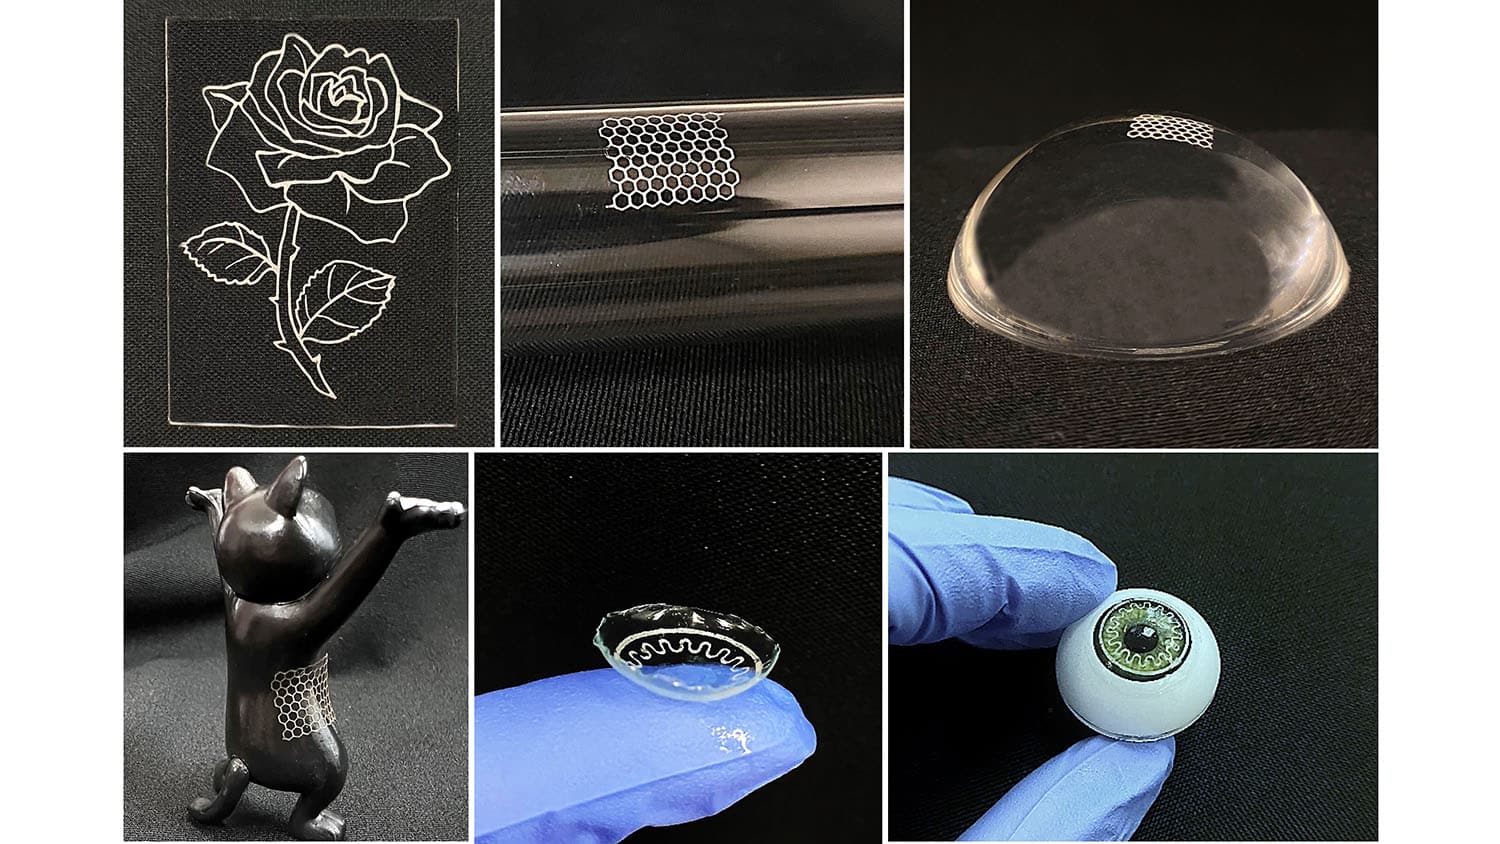 image includes six photos of circuits printed on curved surfaces, including a contact lens